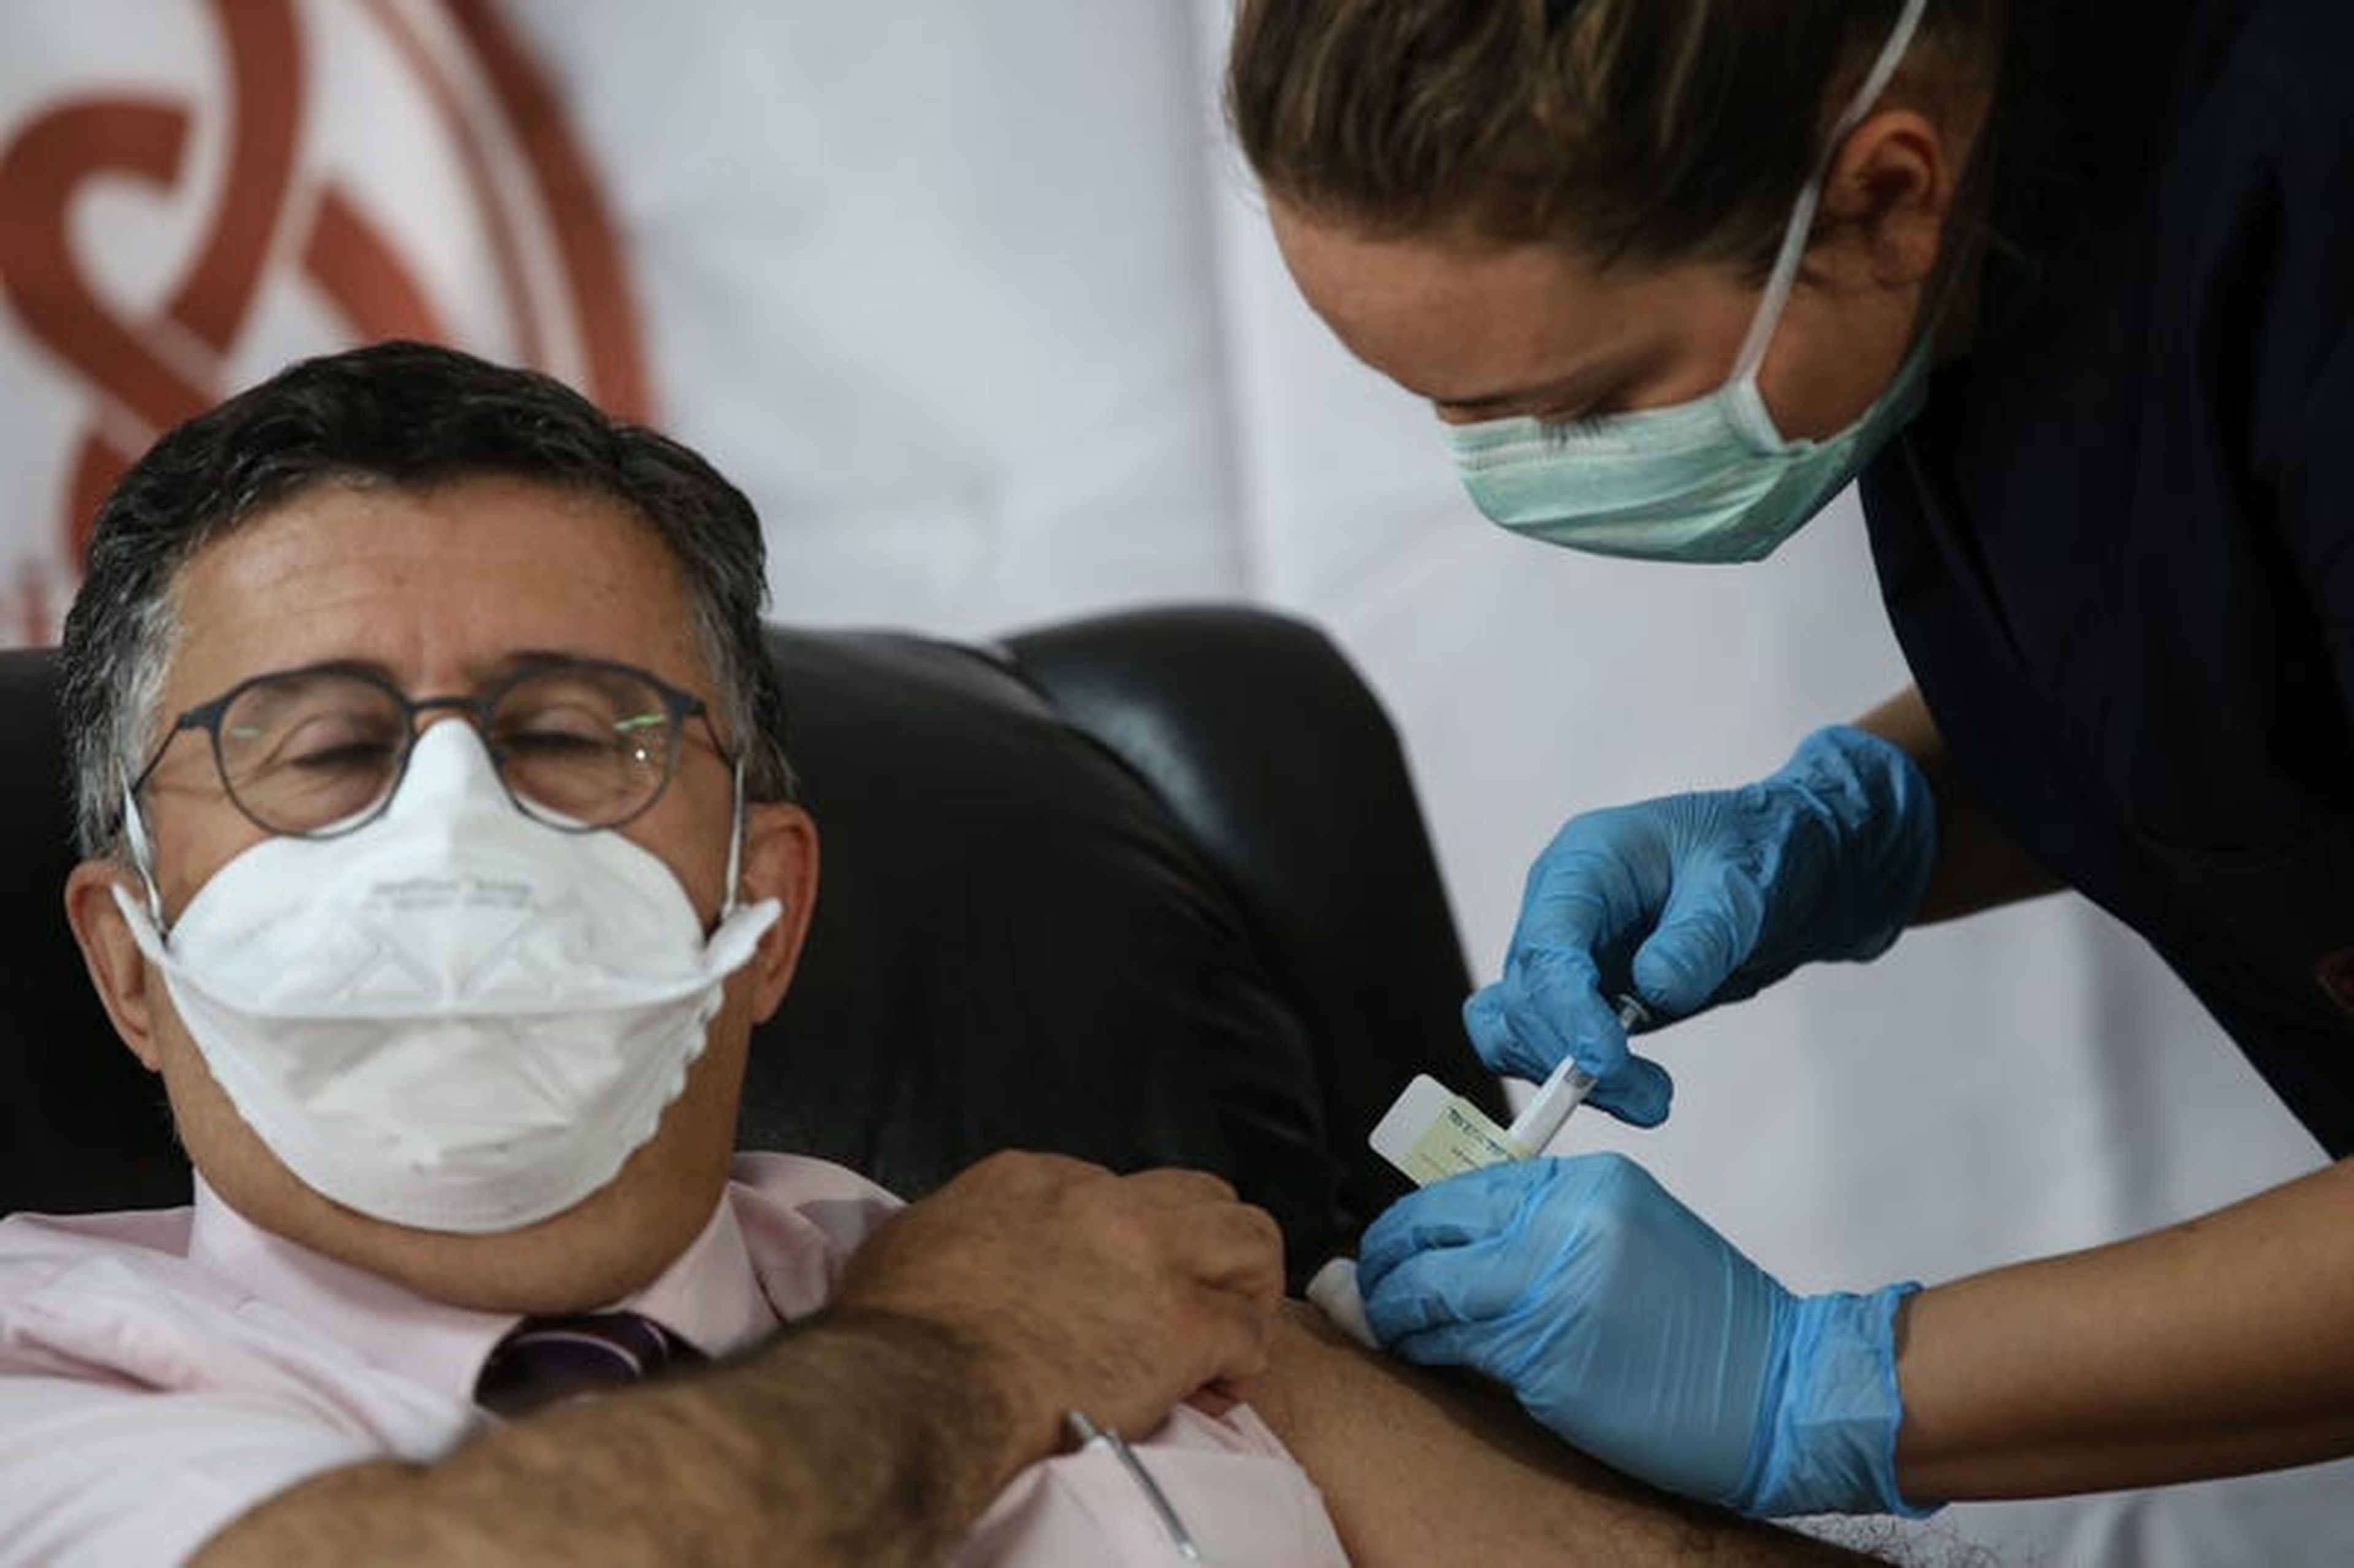 A healthcare worker in Turkey injects a patient with the vaccine candidate from Pfizer and BioNTech in a phase 3 trial in October 2020.